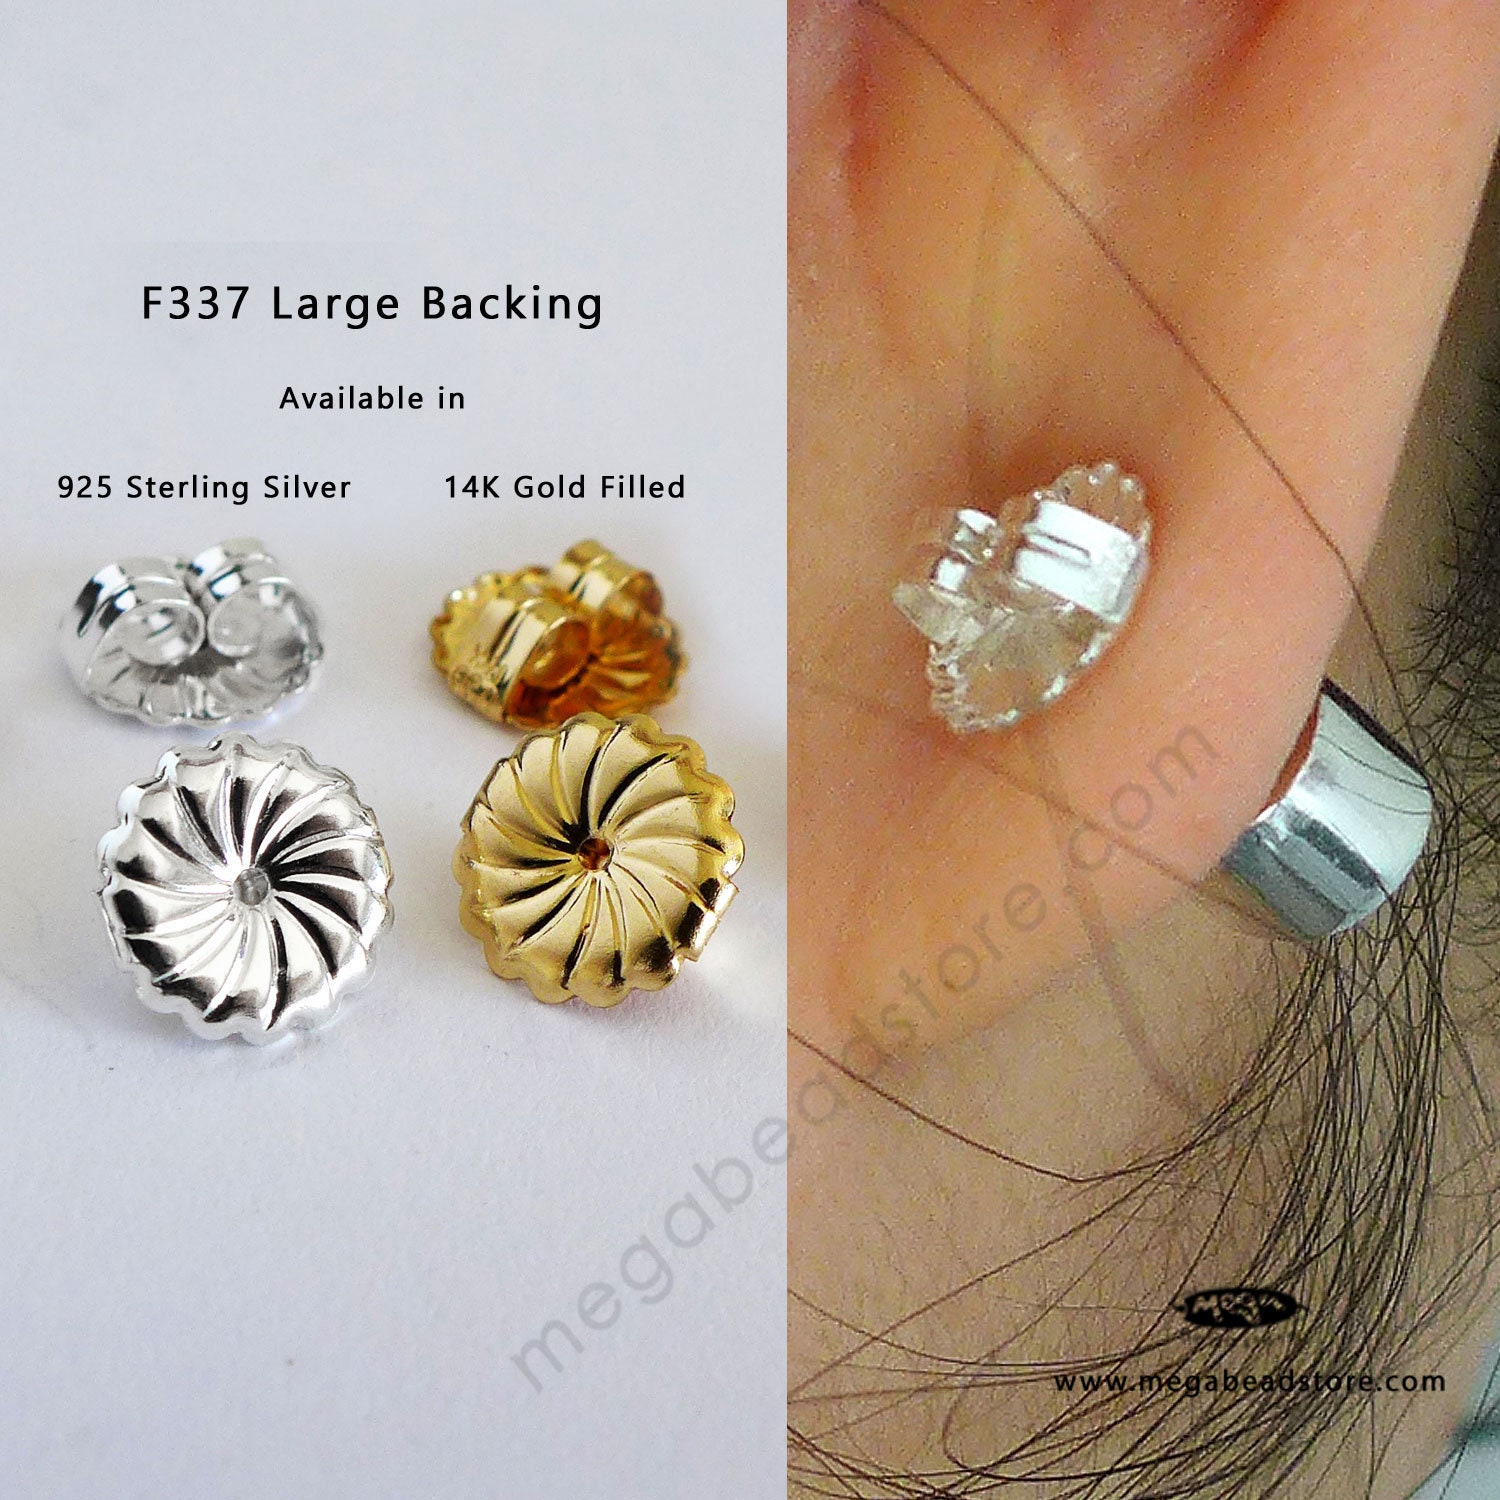 2 Pieces Gold / Silver Silicone Earring Backs for Heavy Earrings Lifting  Earrings Backs Support Hypoallergenic Comfy Earring Back Z358 